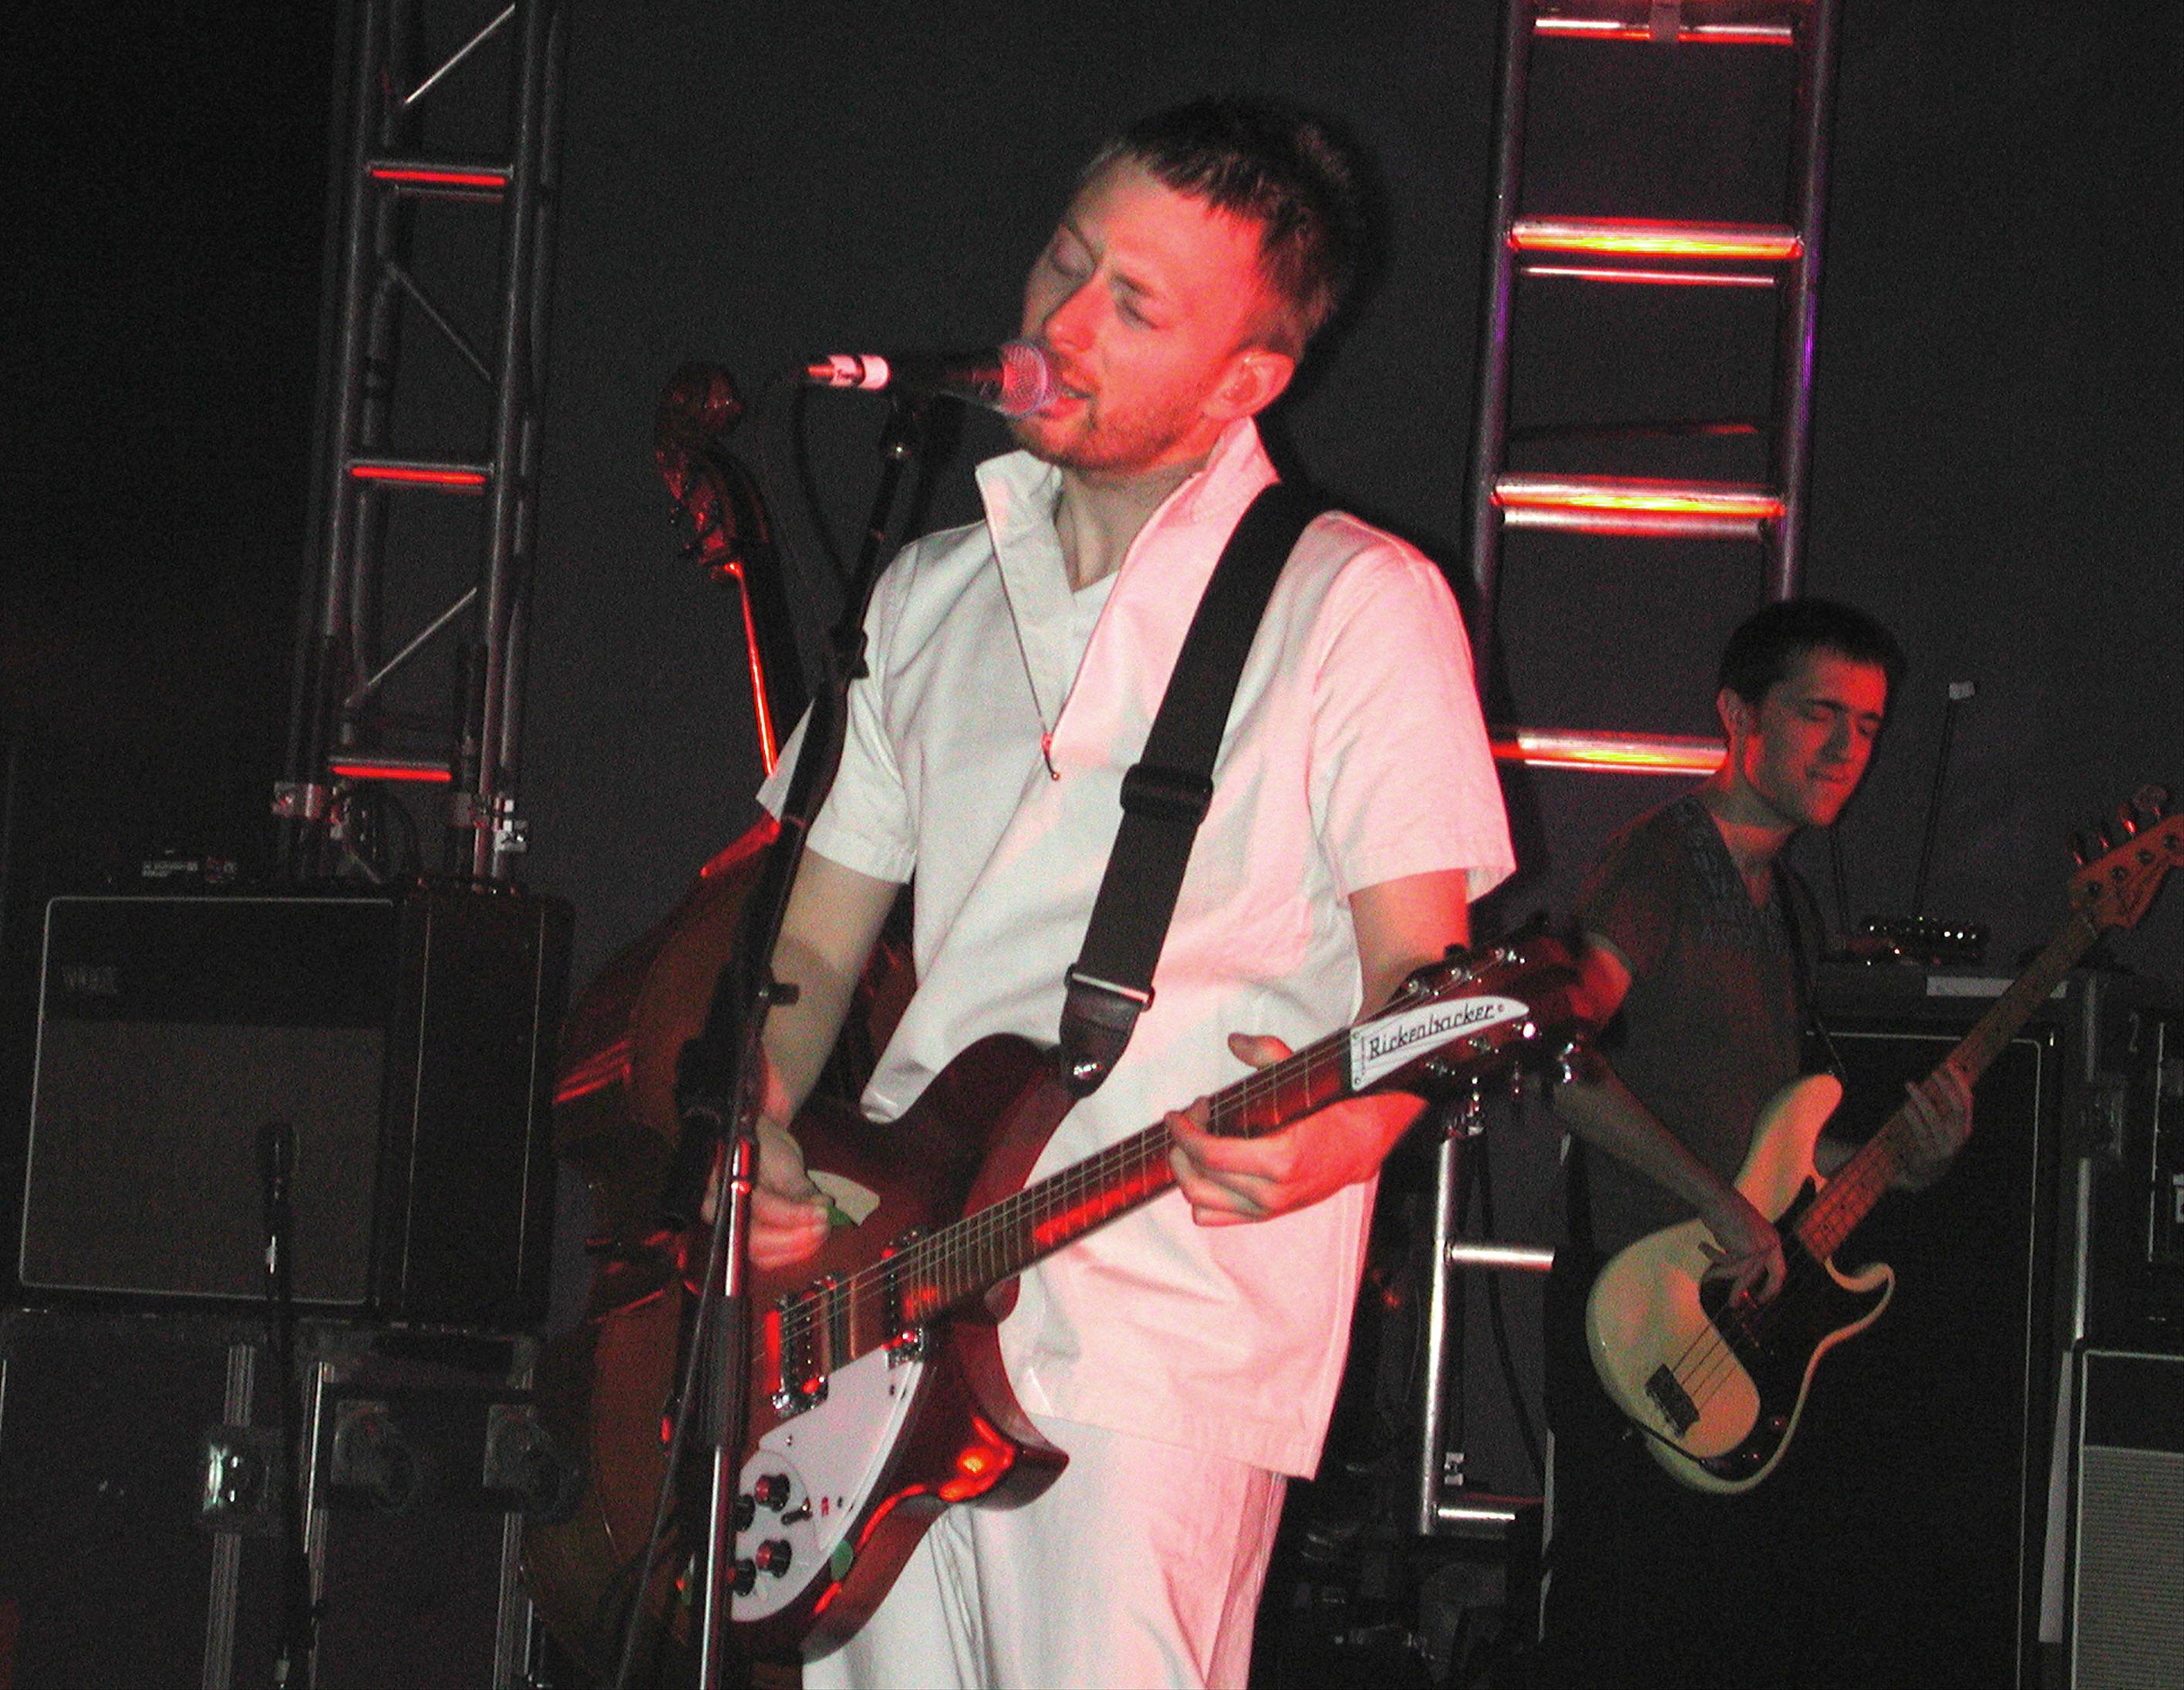 The song was inspired by singer Thom Yorke’s dislike of being sneered at